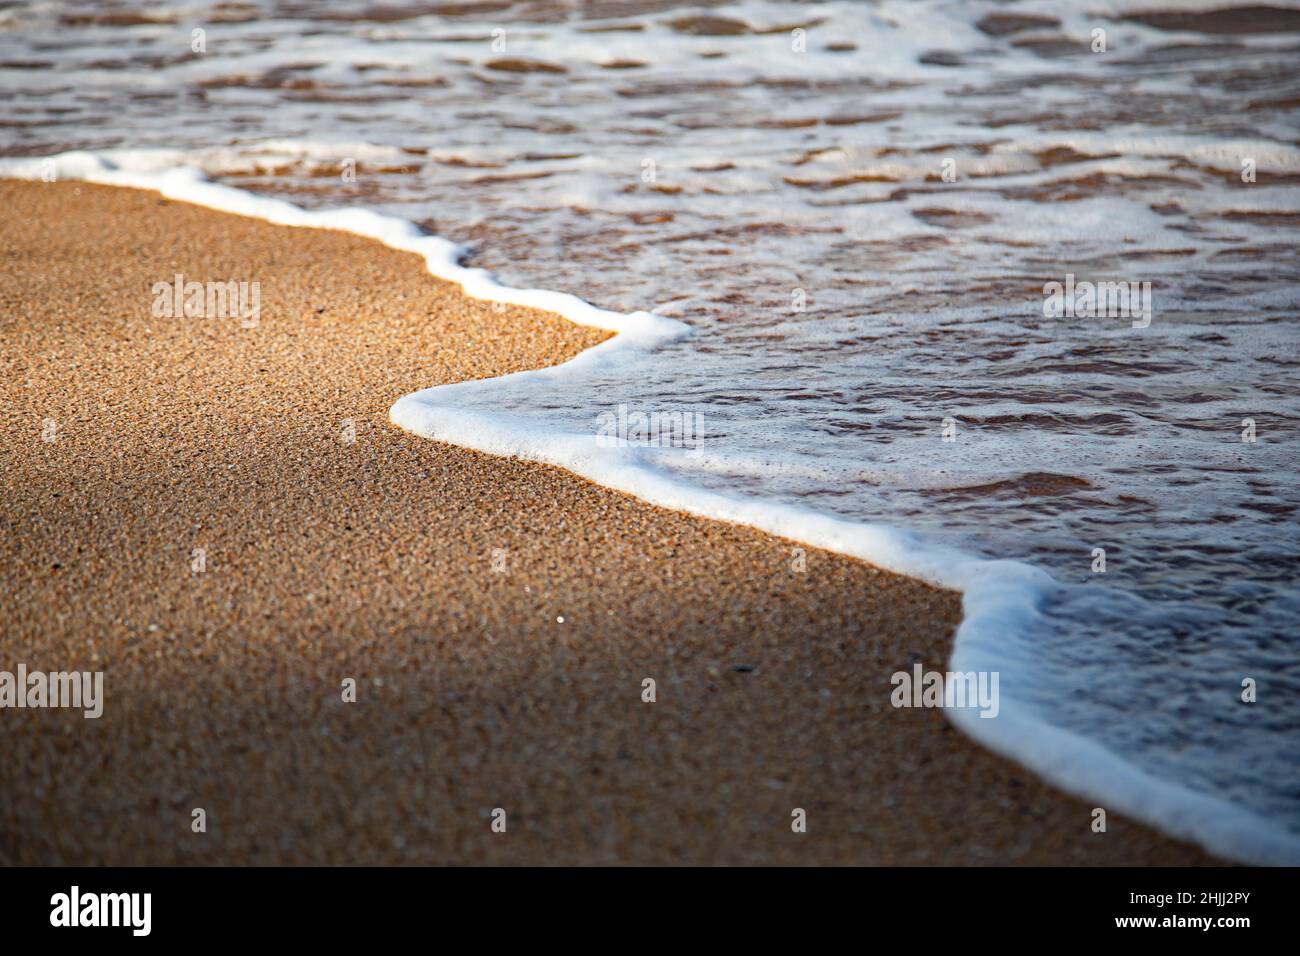 Sea foam with dappled shadowy light filtering over the scene. Stock Photo